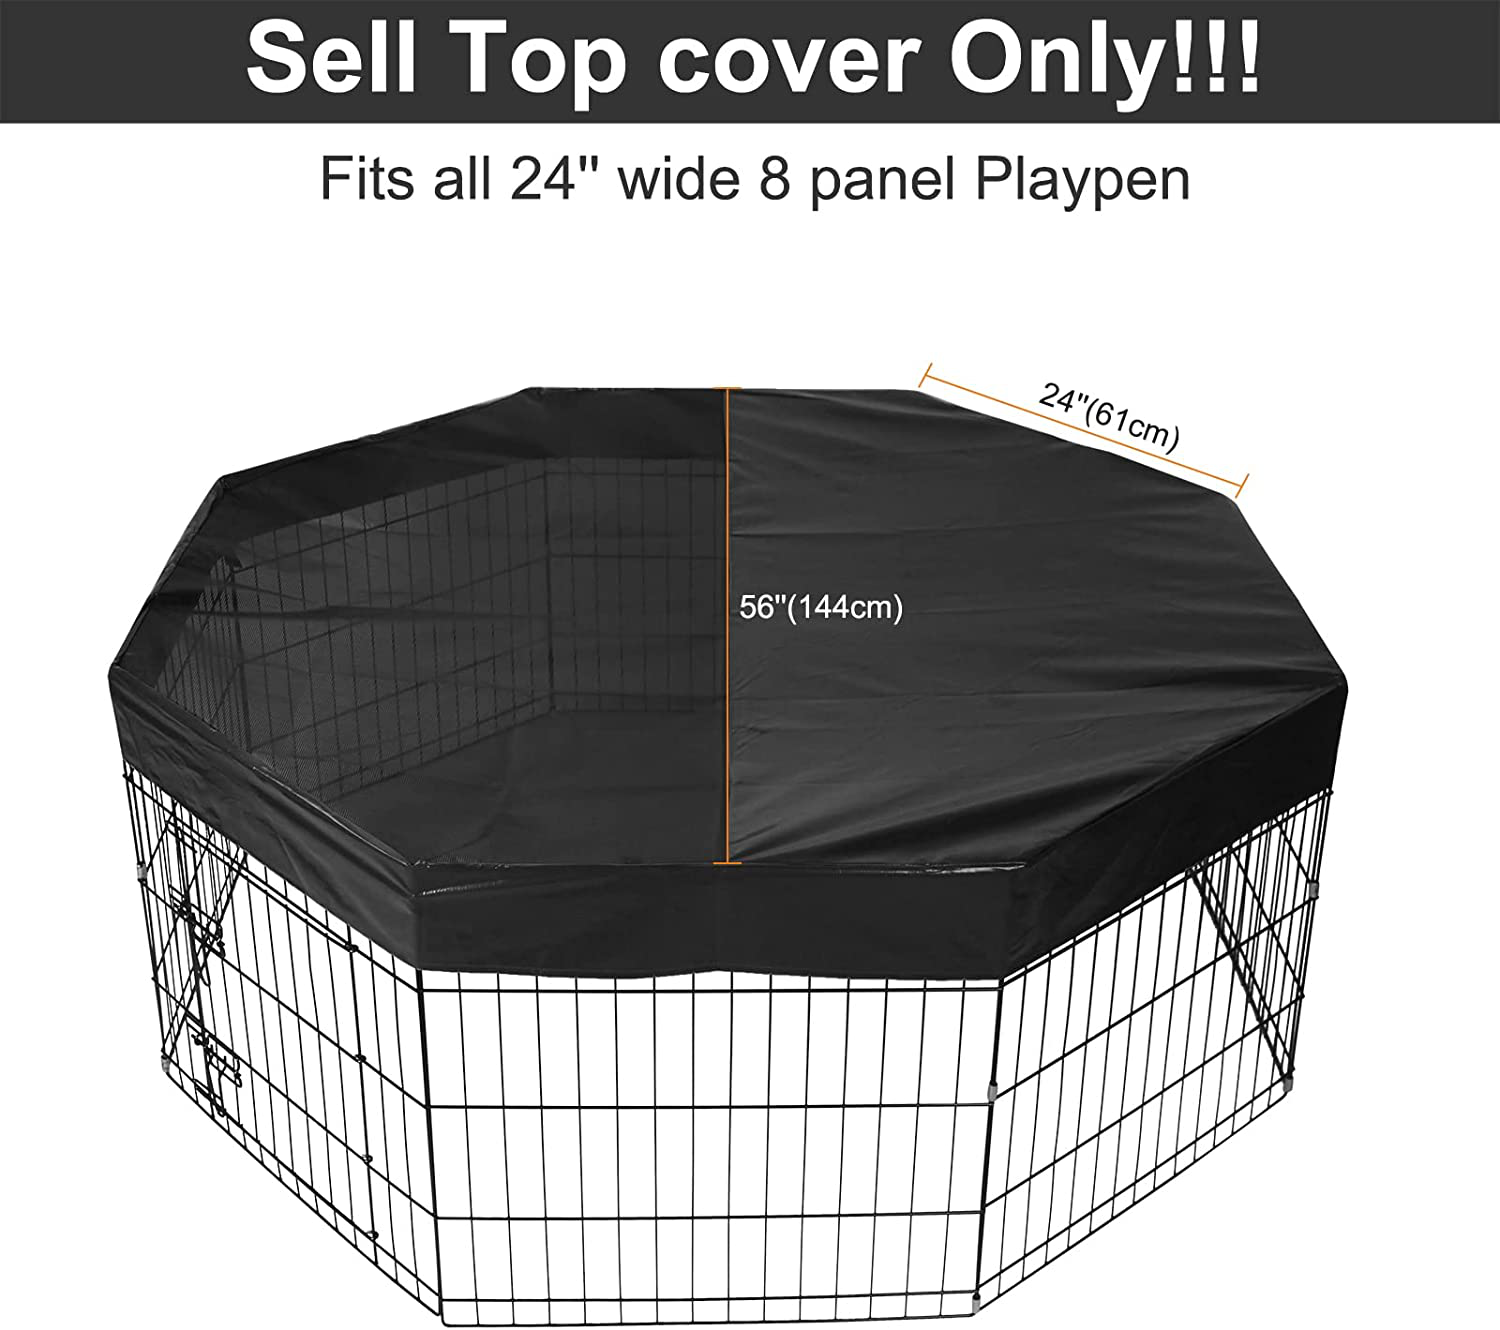 GORUTIN Dog Playpen Cover, Pet Playpen Mesh Top Cover Protect Dog from Sun/Rain Prevent Escape, Dog Pen Cover Shaded Area Indoor Outdoor Fits 24 Inch 8 Panels Playpen (Sell Top Cover Only!)